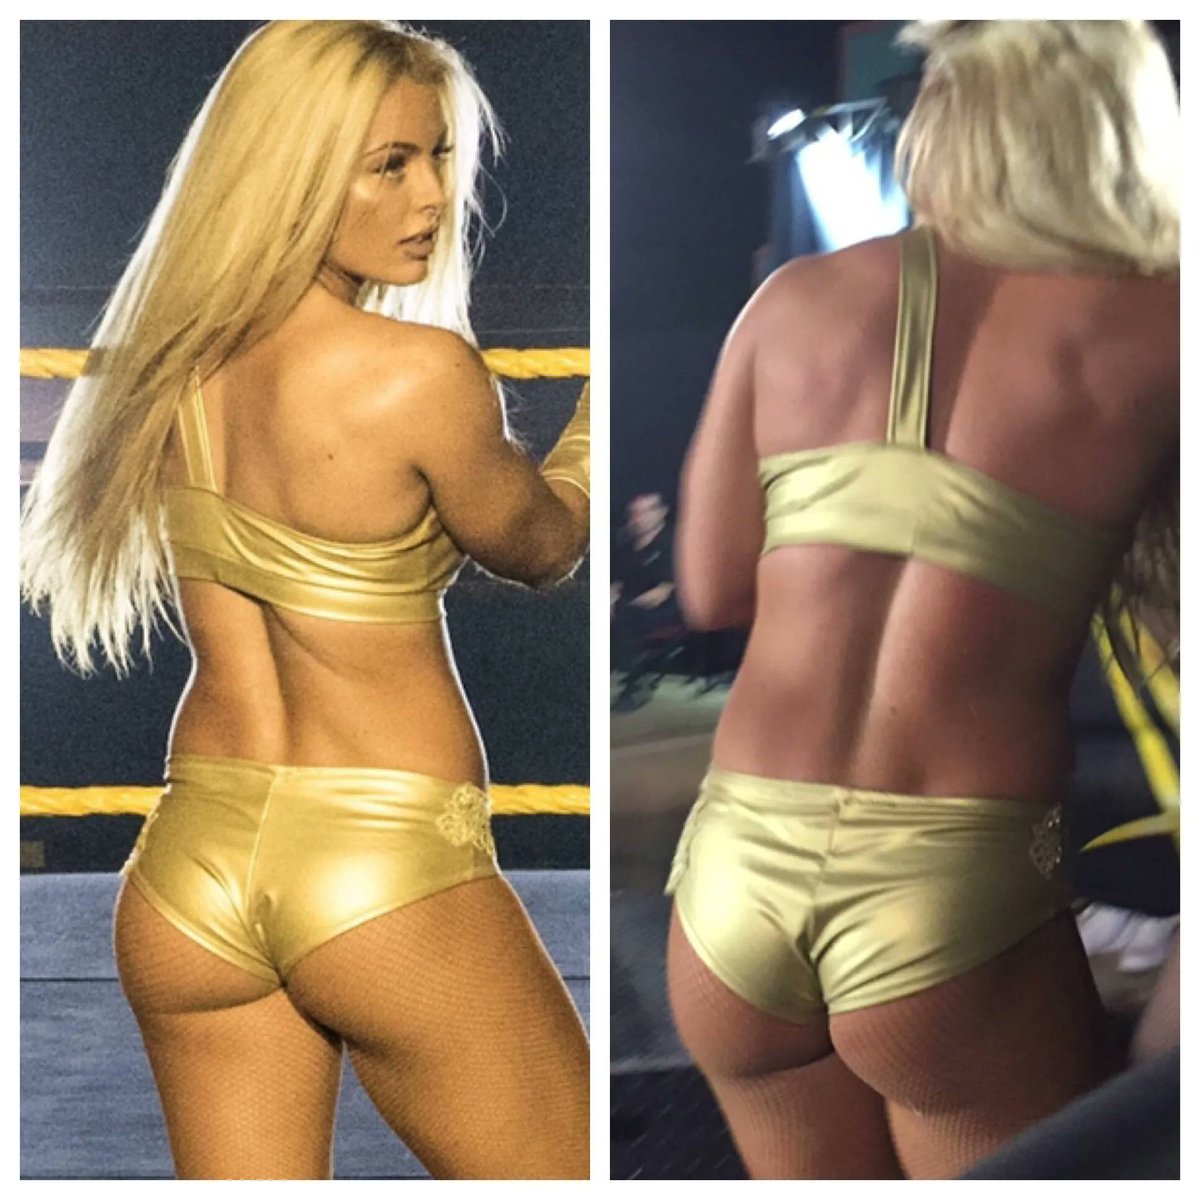 Mandy rose only fans naked